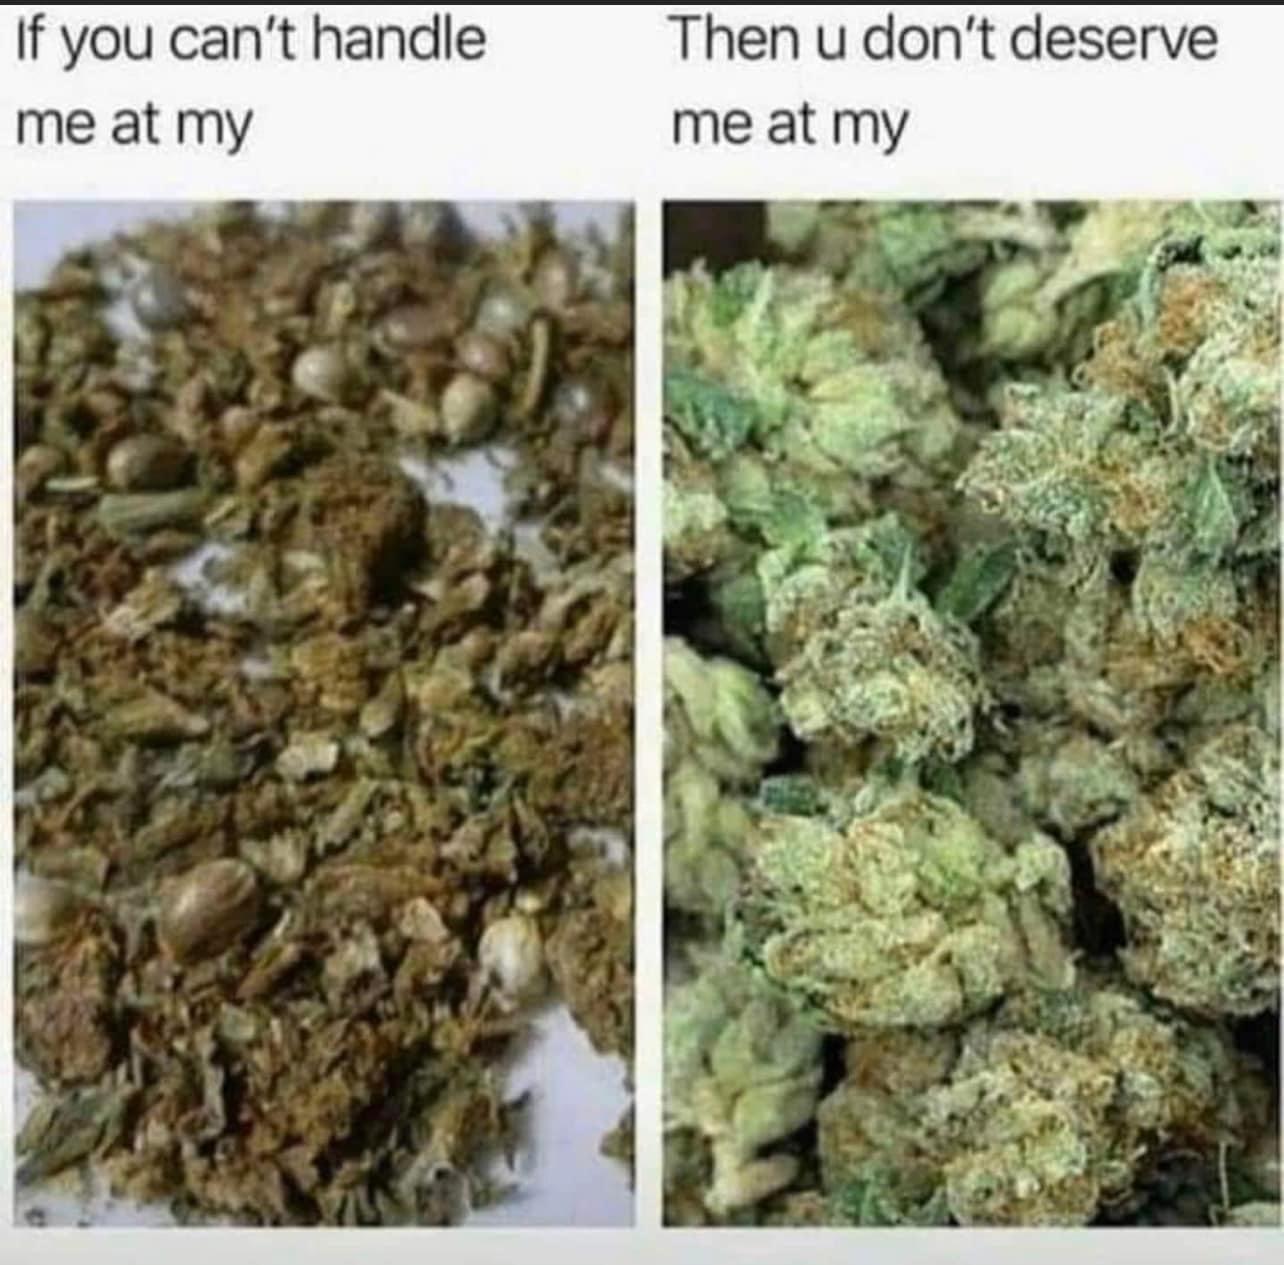 monday morning randomness - indica weed buds - If you can't handle me at my Then u don't deserve me at my